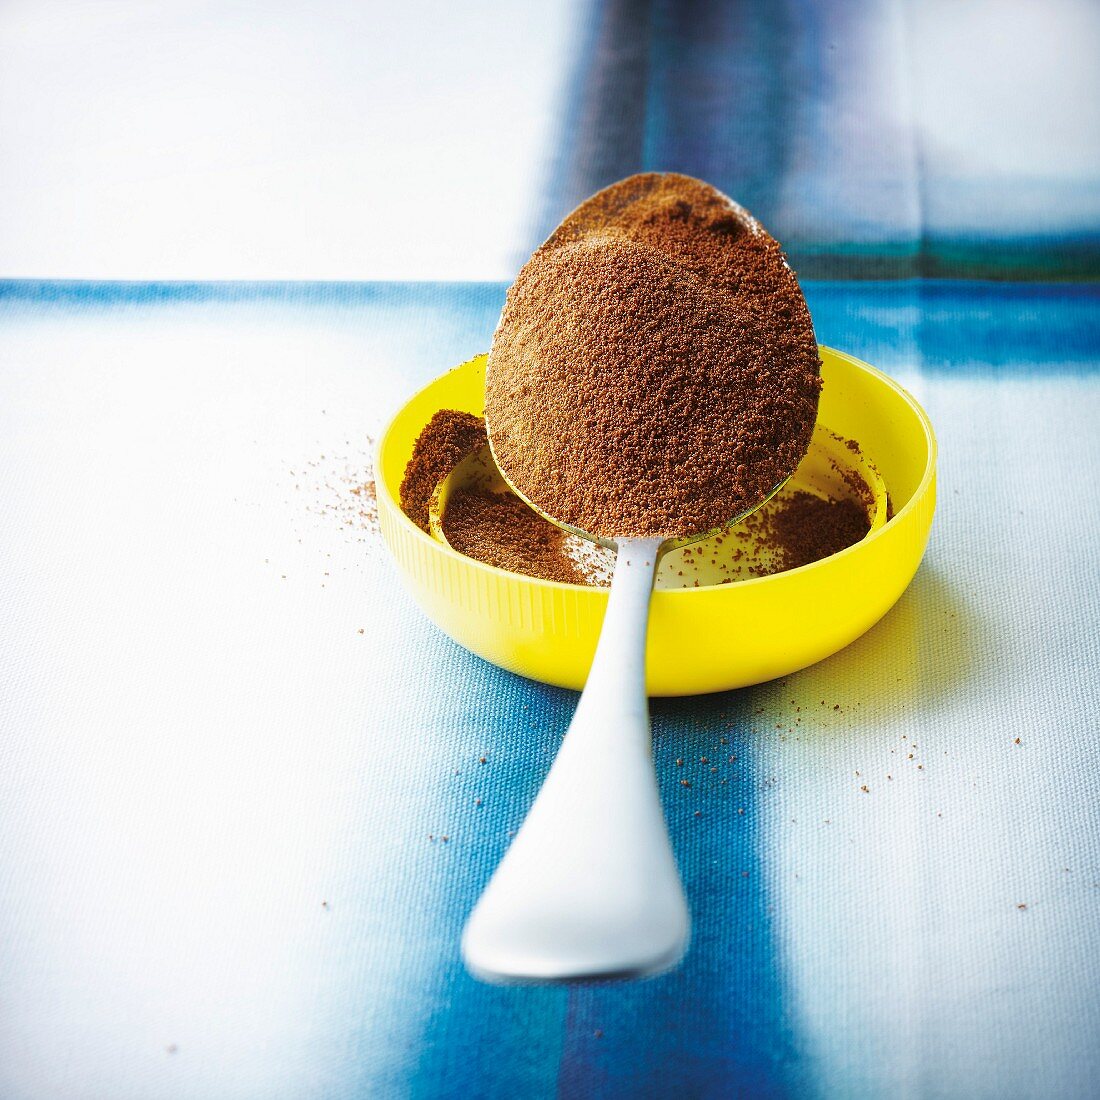 Spoonful of cocoa